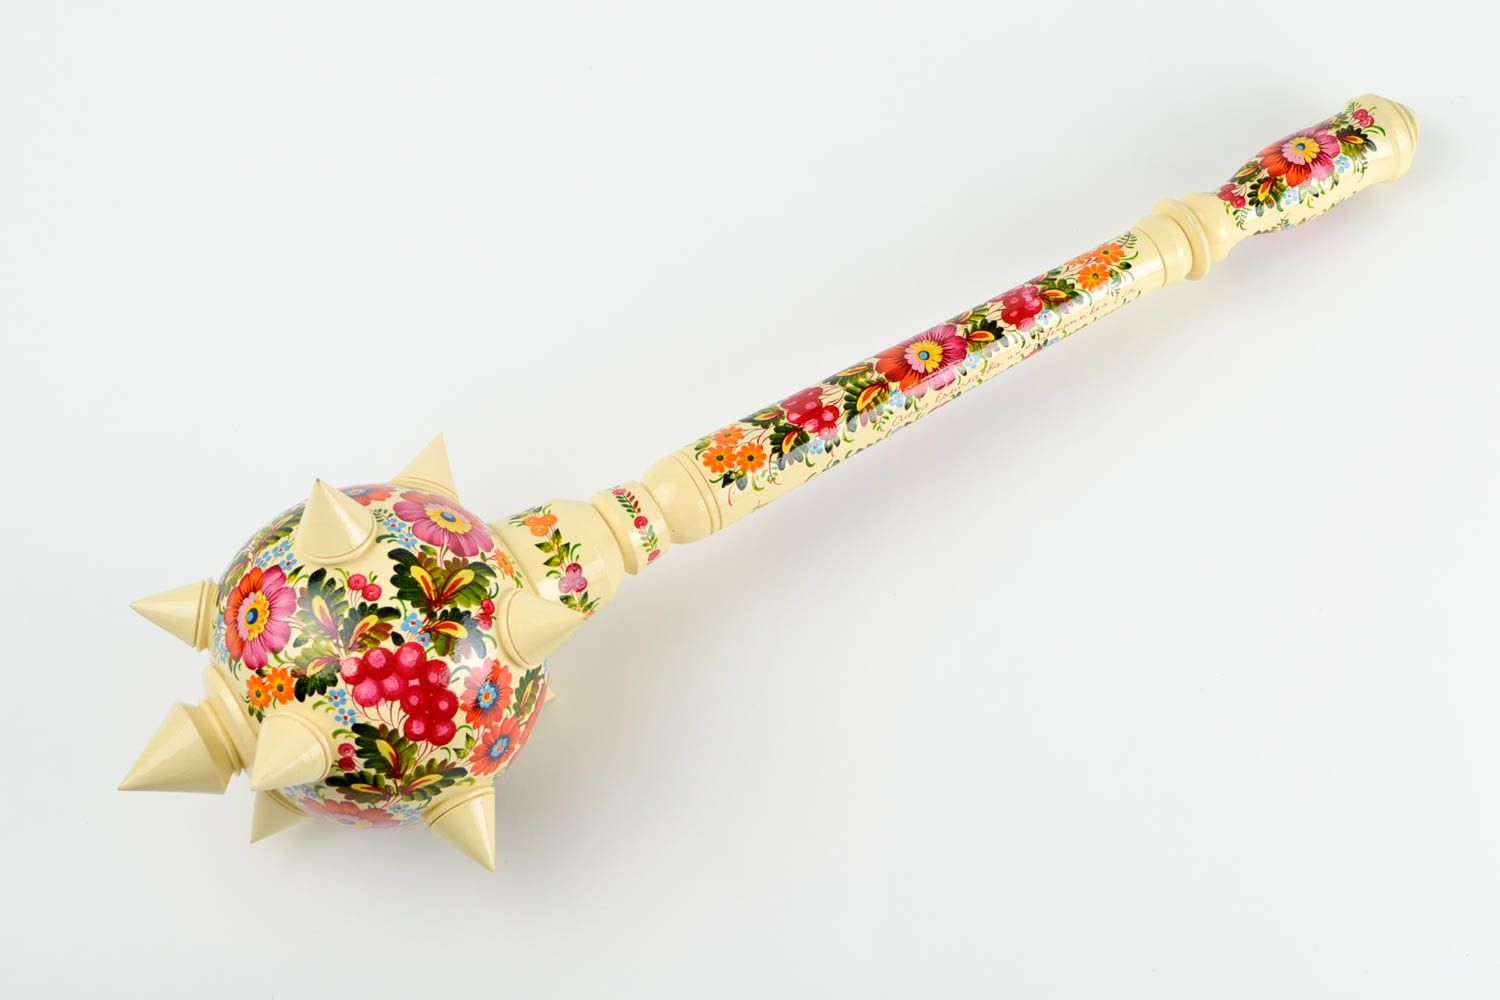 Handmade painted mace wooden mace decorative weapon decorative use only photo 3